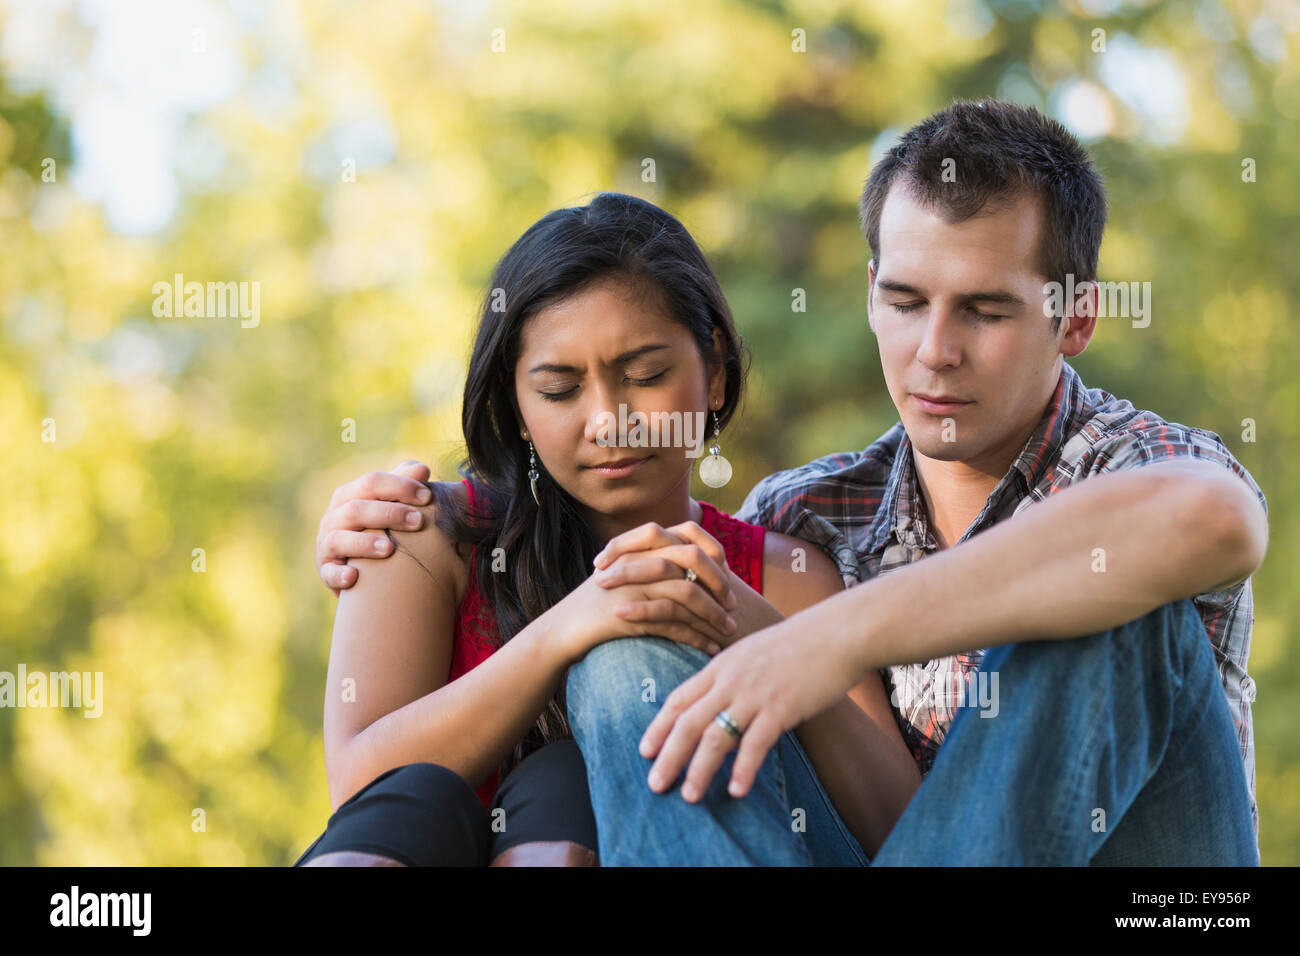 Mixed race couple praying together in a park in autumn; St. Albert, Alberta, Canada Stock Photo